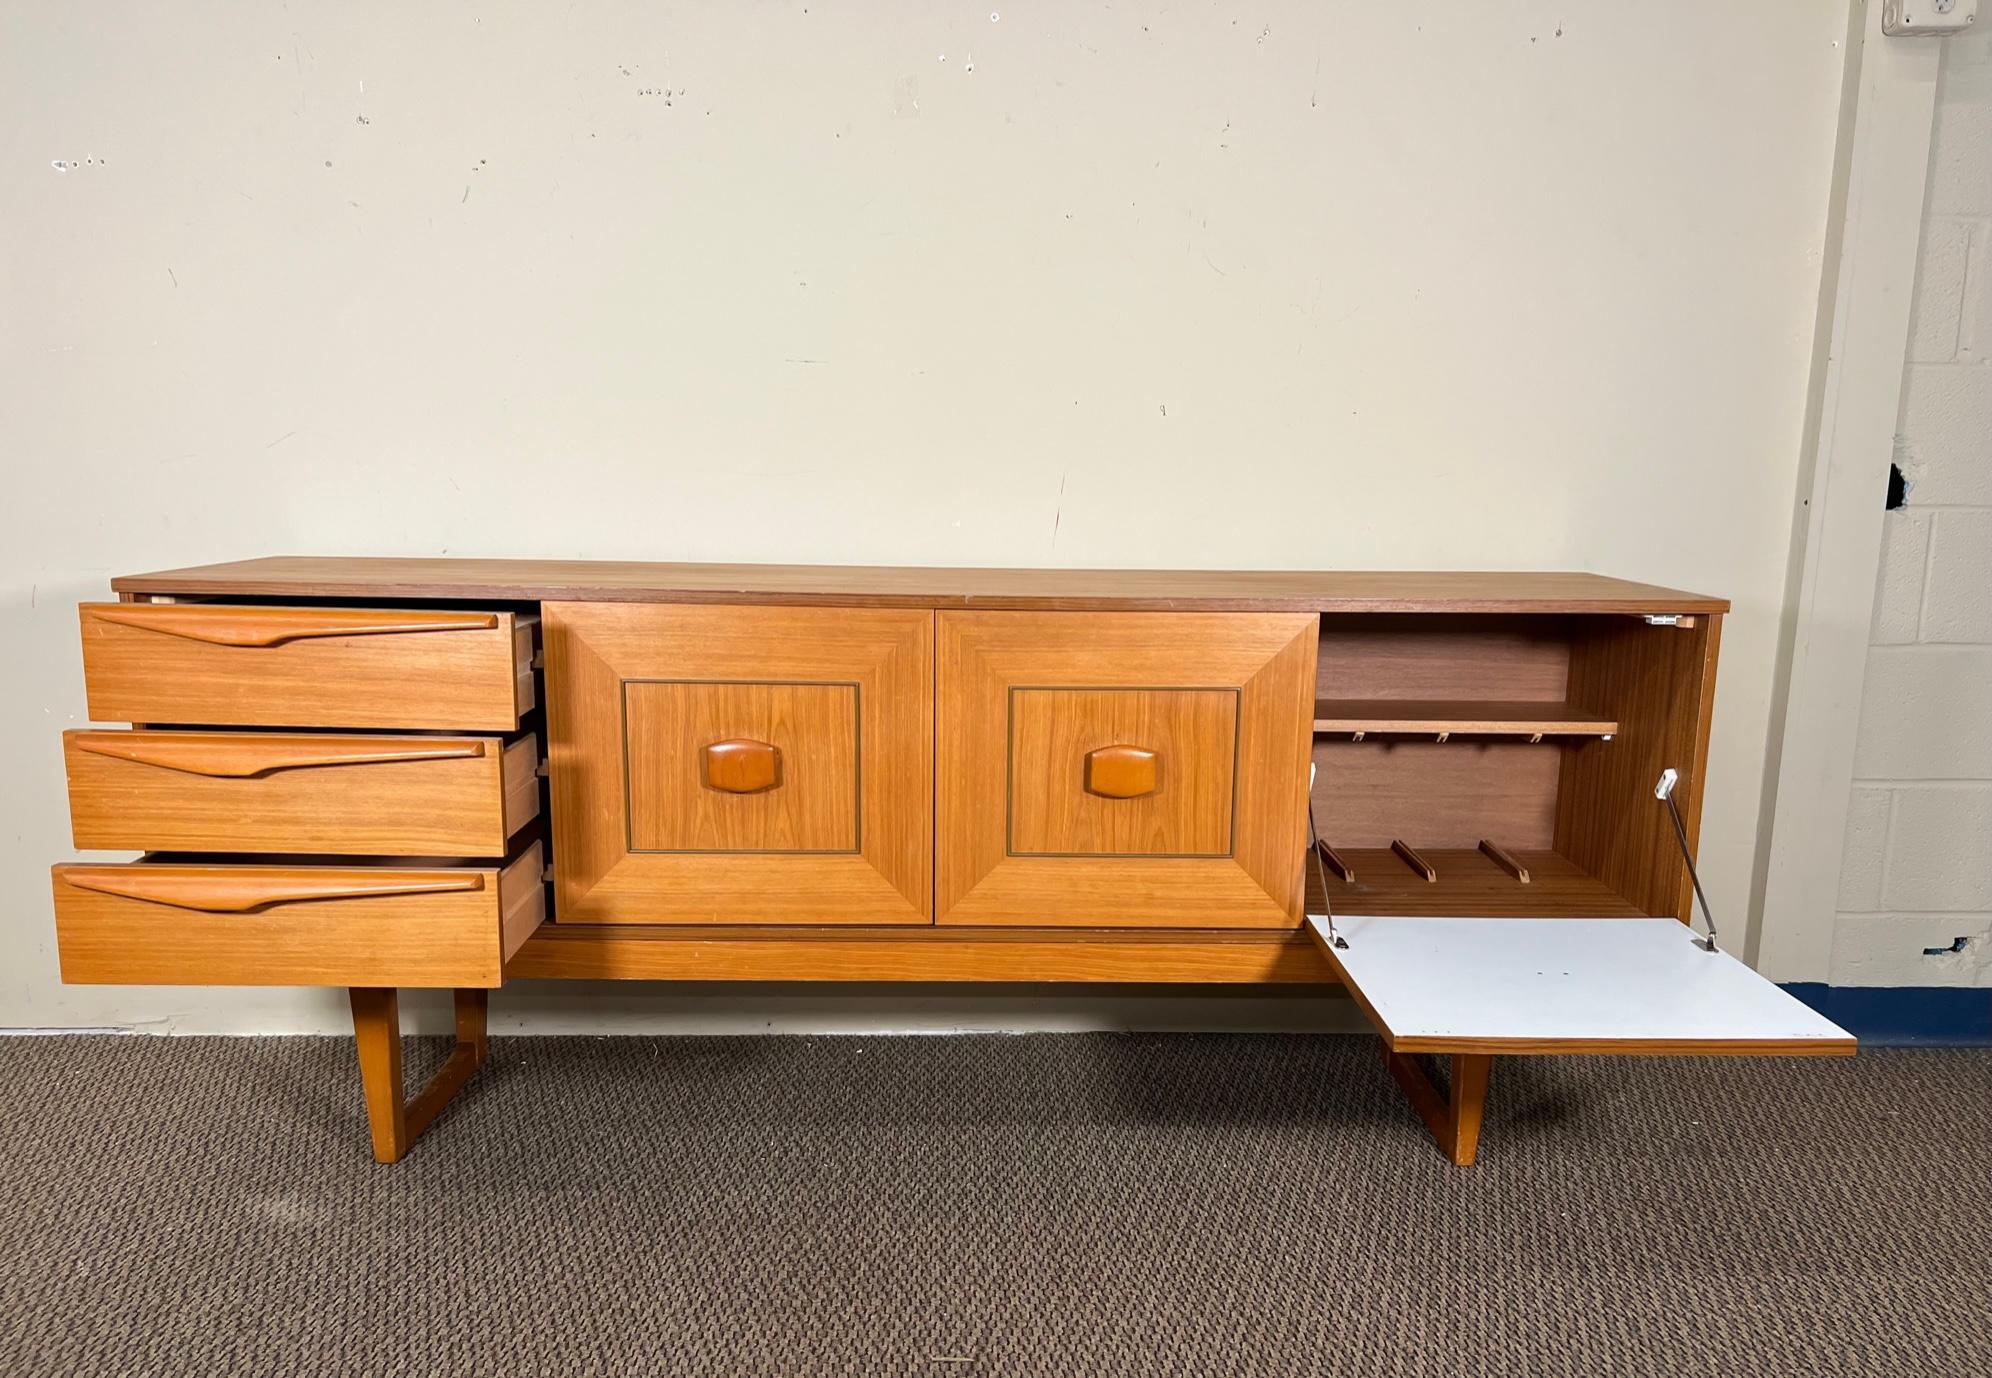 Light wood credenza by Stateroom. Made in England.

Featuring sculpted handles and a drop down door bar cabinet. Very good condition overall. Some marks and scratches. Stains in bottom drawer, paint spots on the right side. Some dividers added